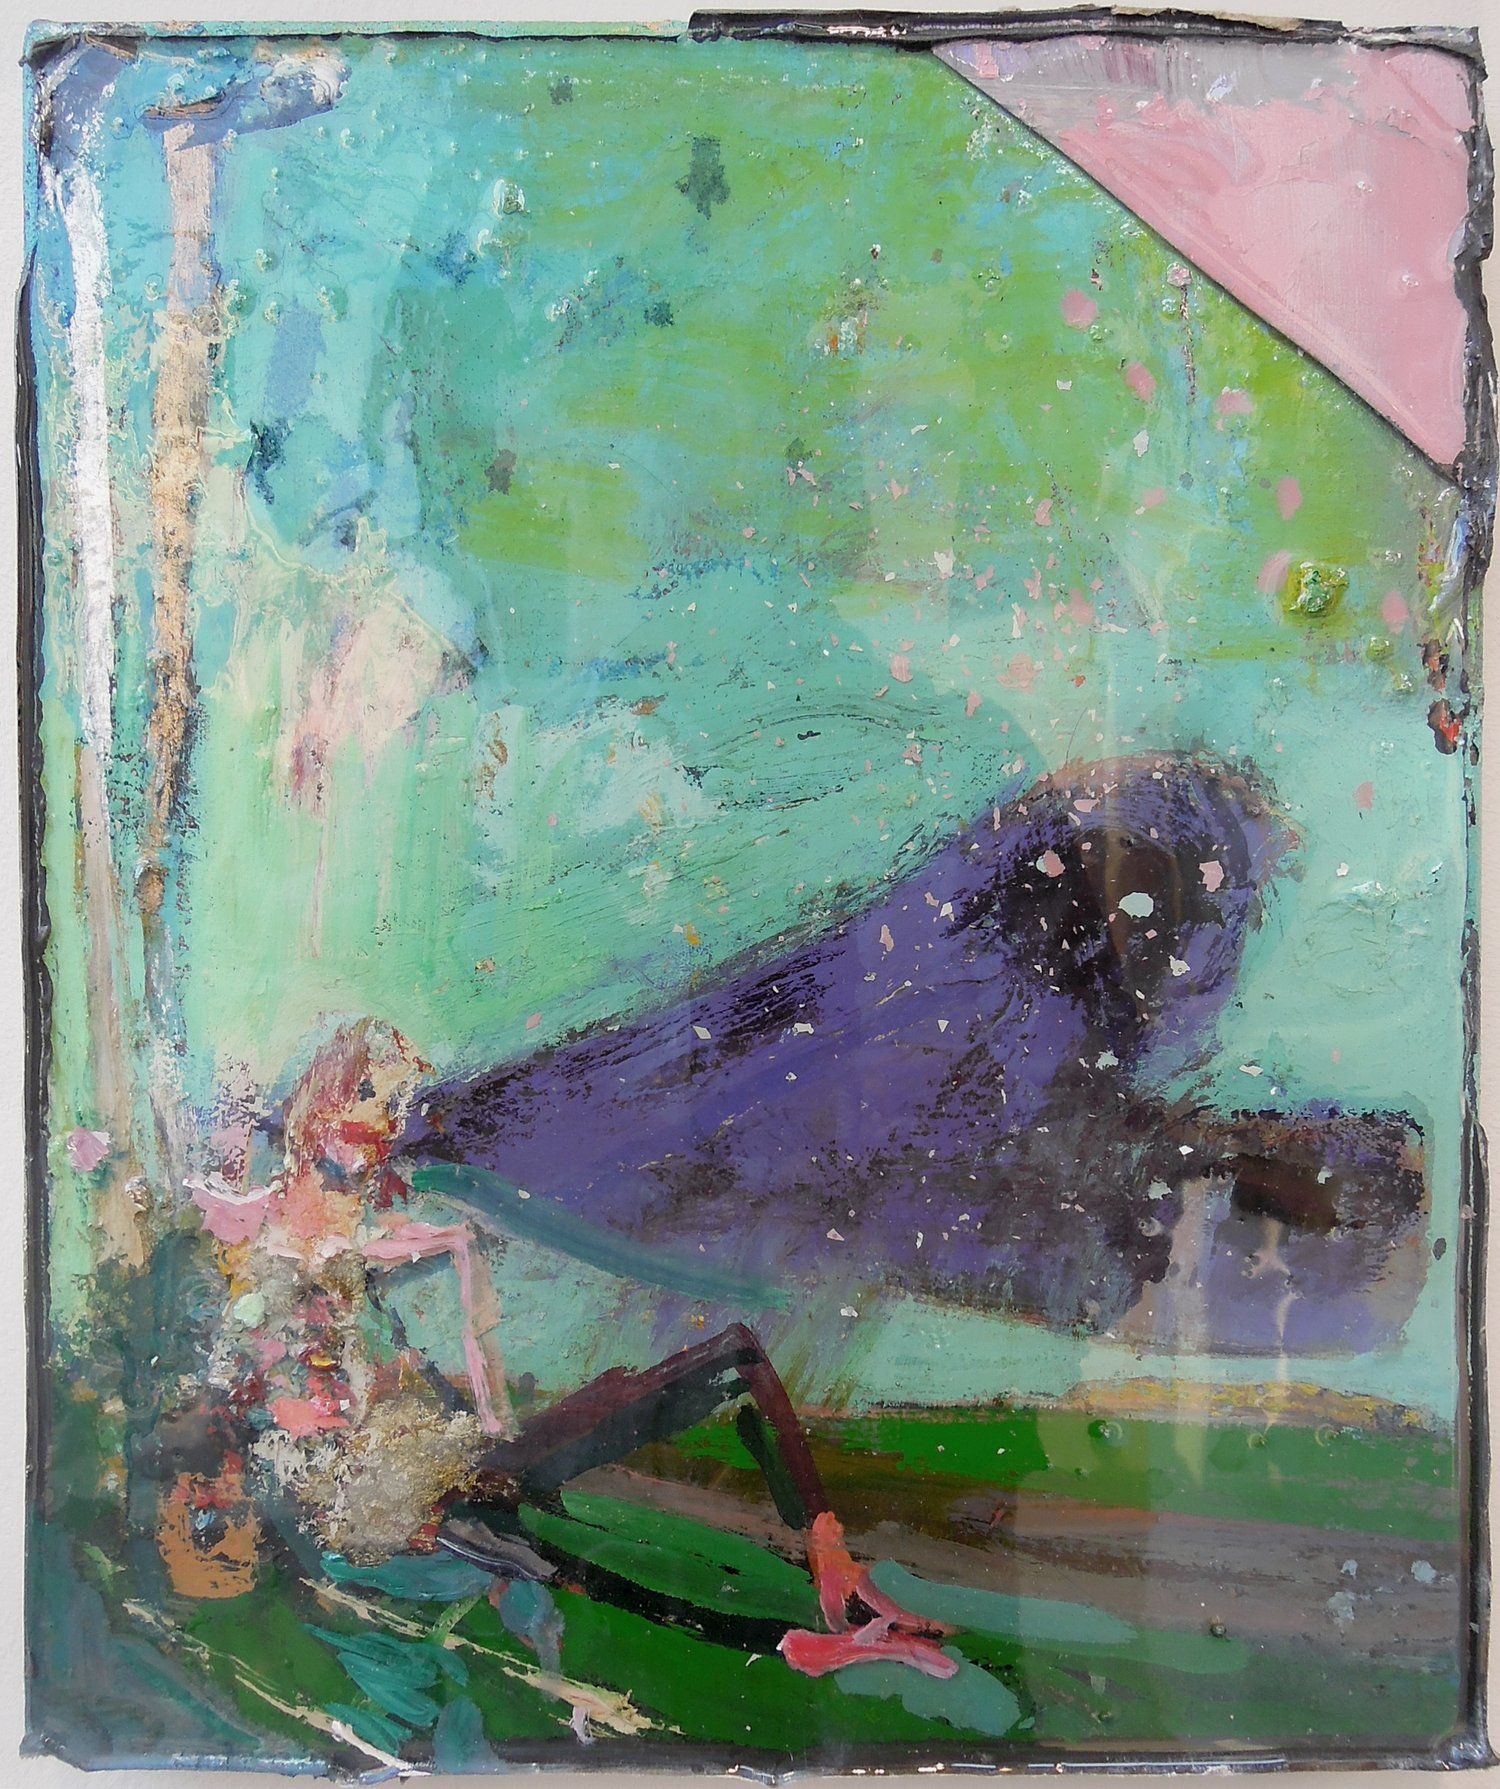 Painting of a figure breathing out purple smoke while reclined on green grass.